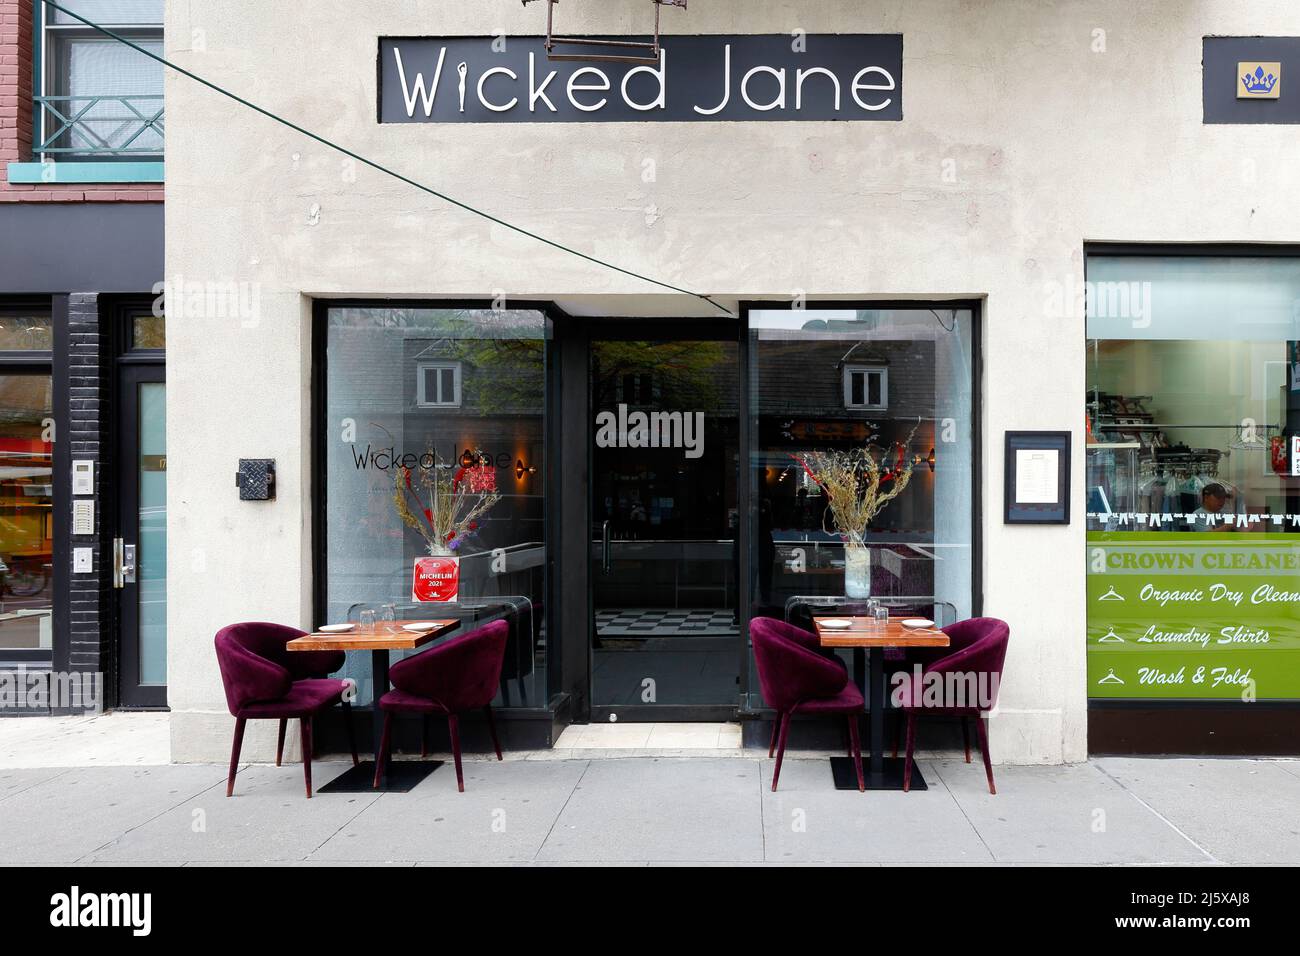 Wicked Jane, 15 W 8th St, New York, NYC storefront photo of a Modern American restaurant in the Greenwich Village neighborhood in Manhattan. Stock Photo